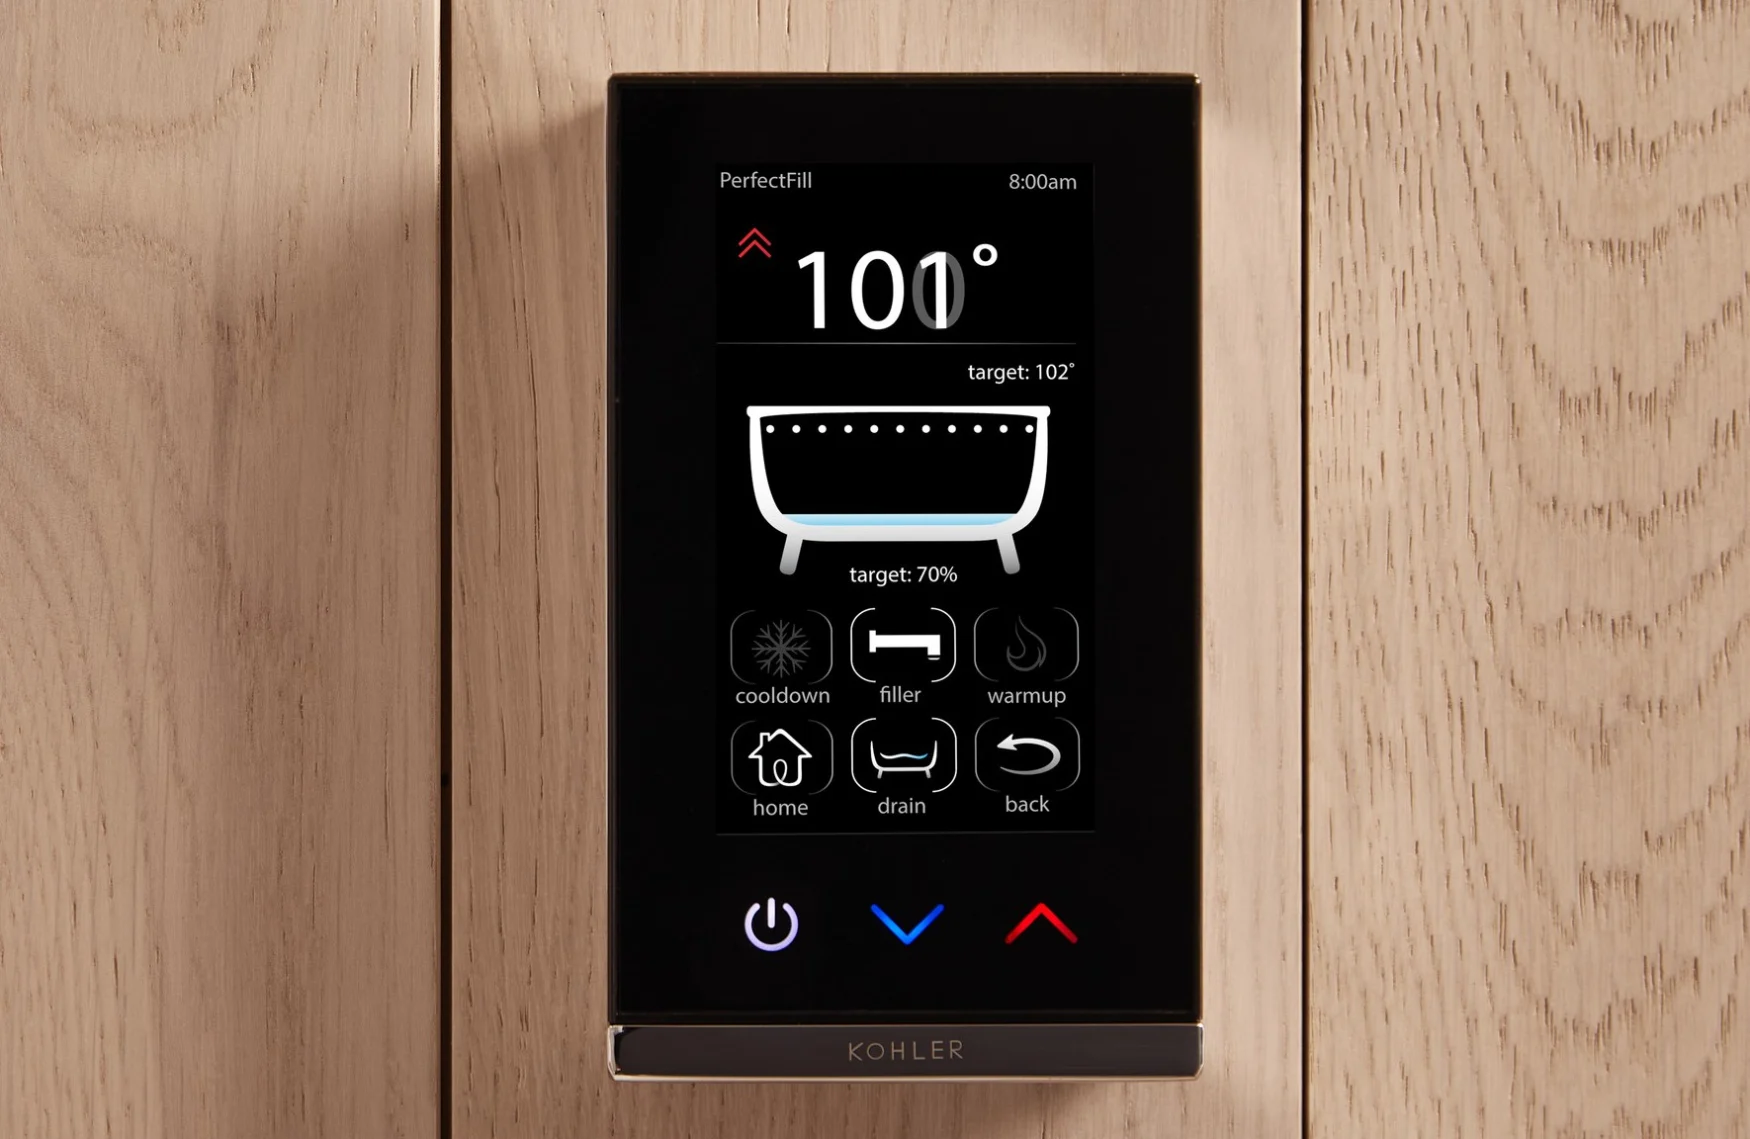 The control panel for Kohler's PerfectFill system, which allows owners to control the depth and temperature of their bath water without monitoring it manually.